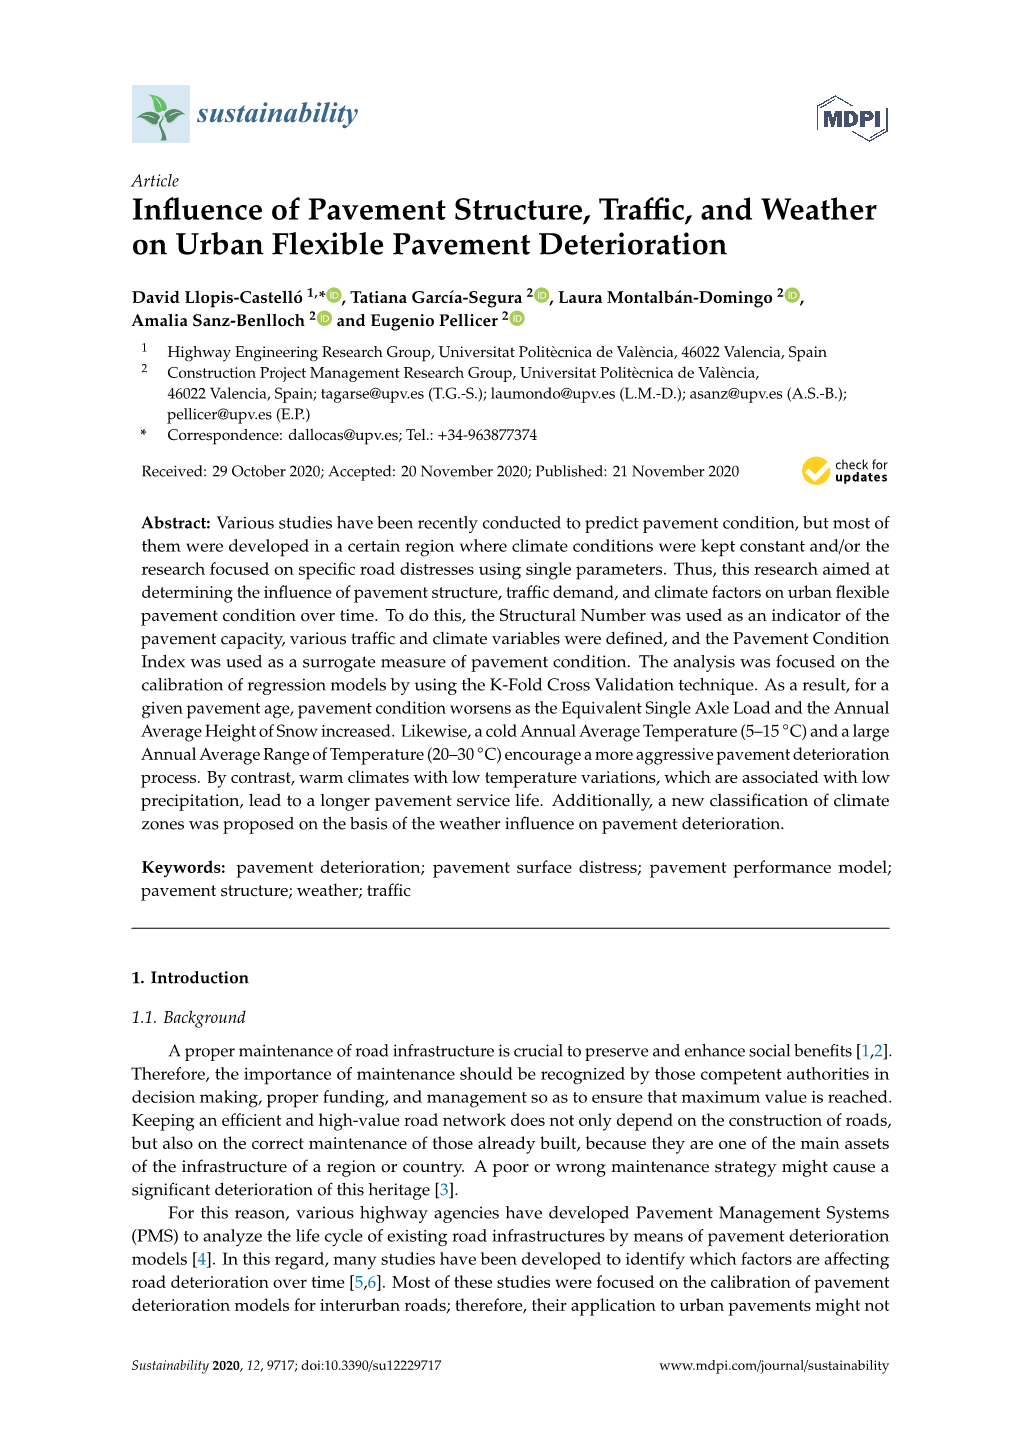 Influence of Pavement Structure, Traffic, and Weather on Urban